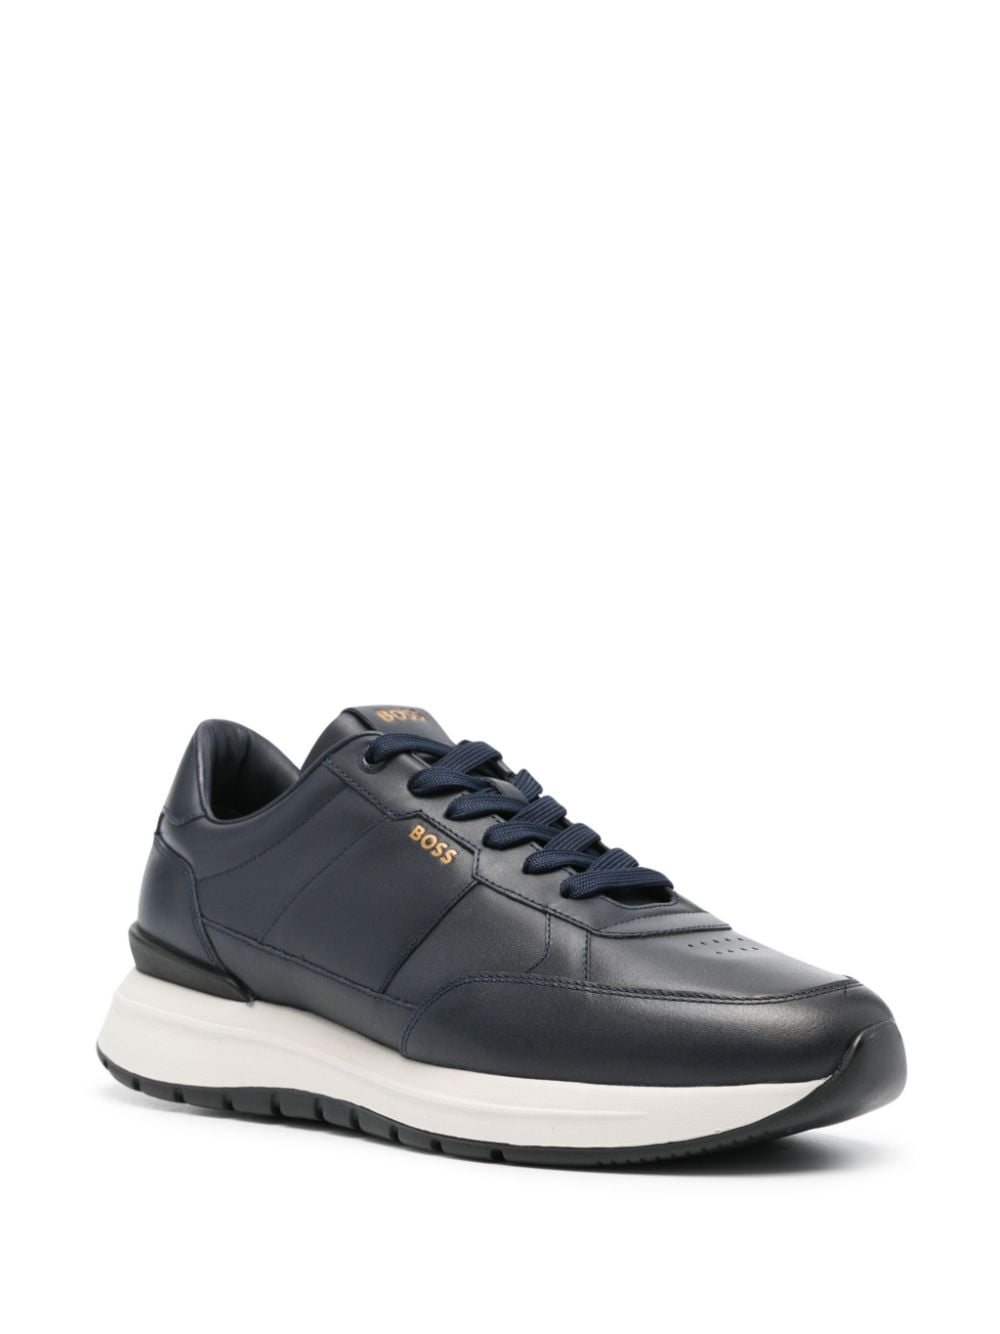 BOSS Jace leather sneakers - Blauw